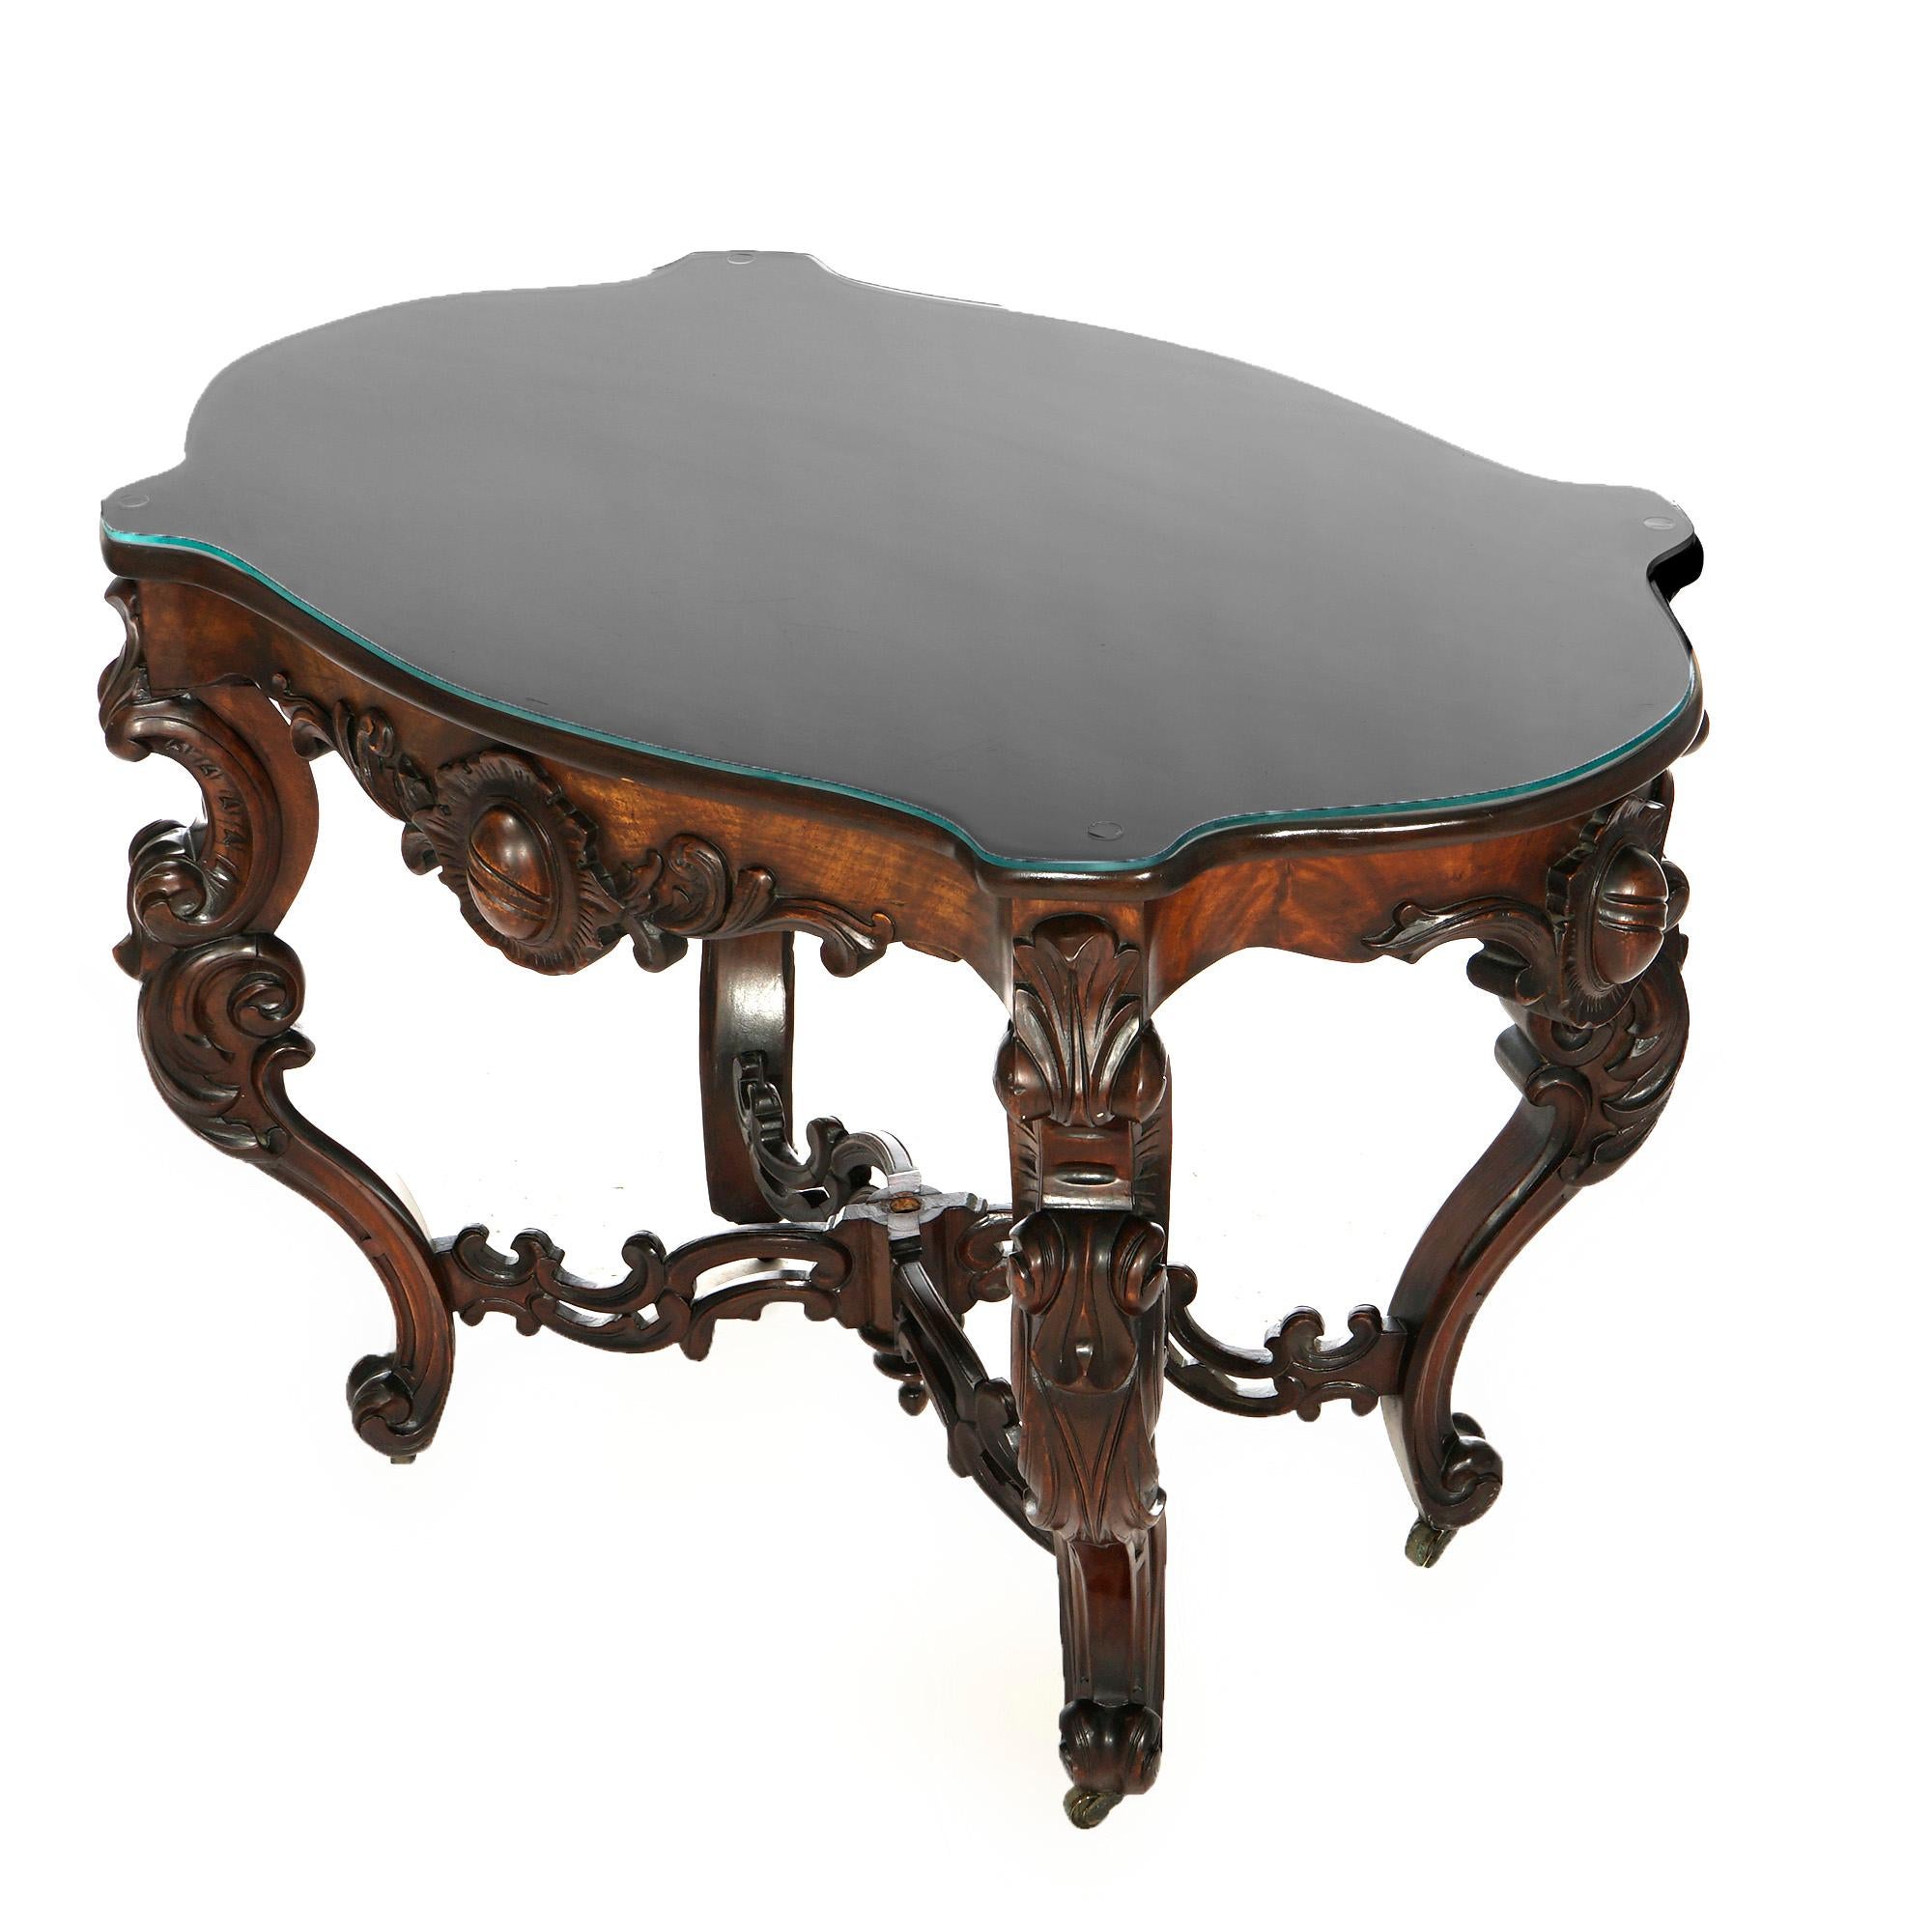 European Antique Rococo Revival Carved Walnut & Marble Turtle Top Parlor Table 19th C